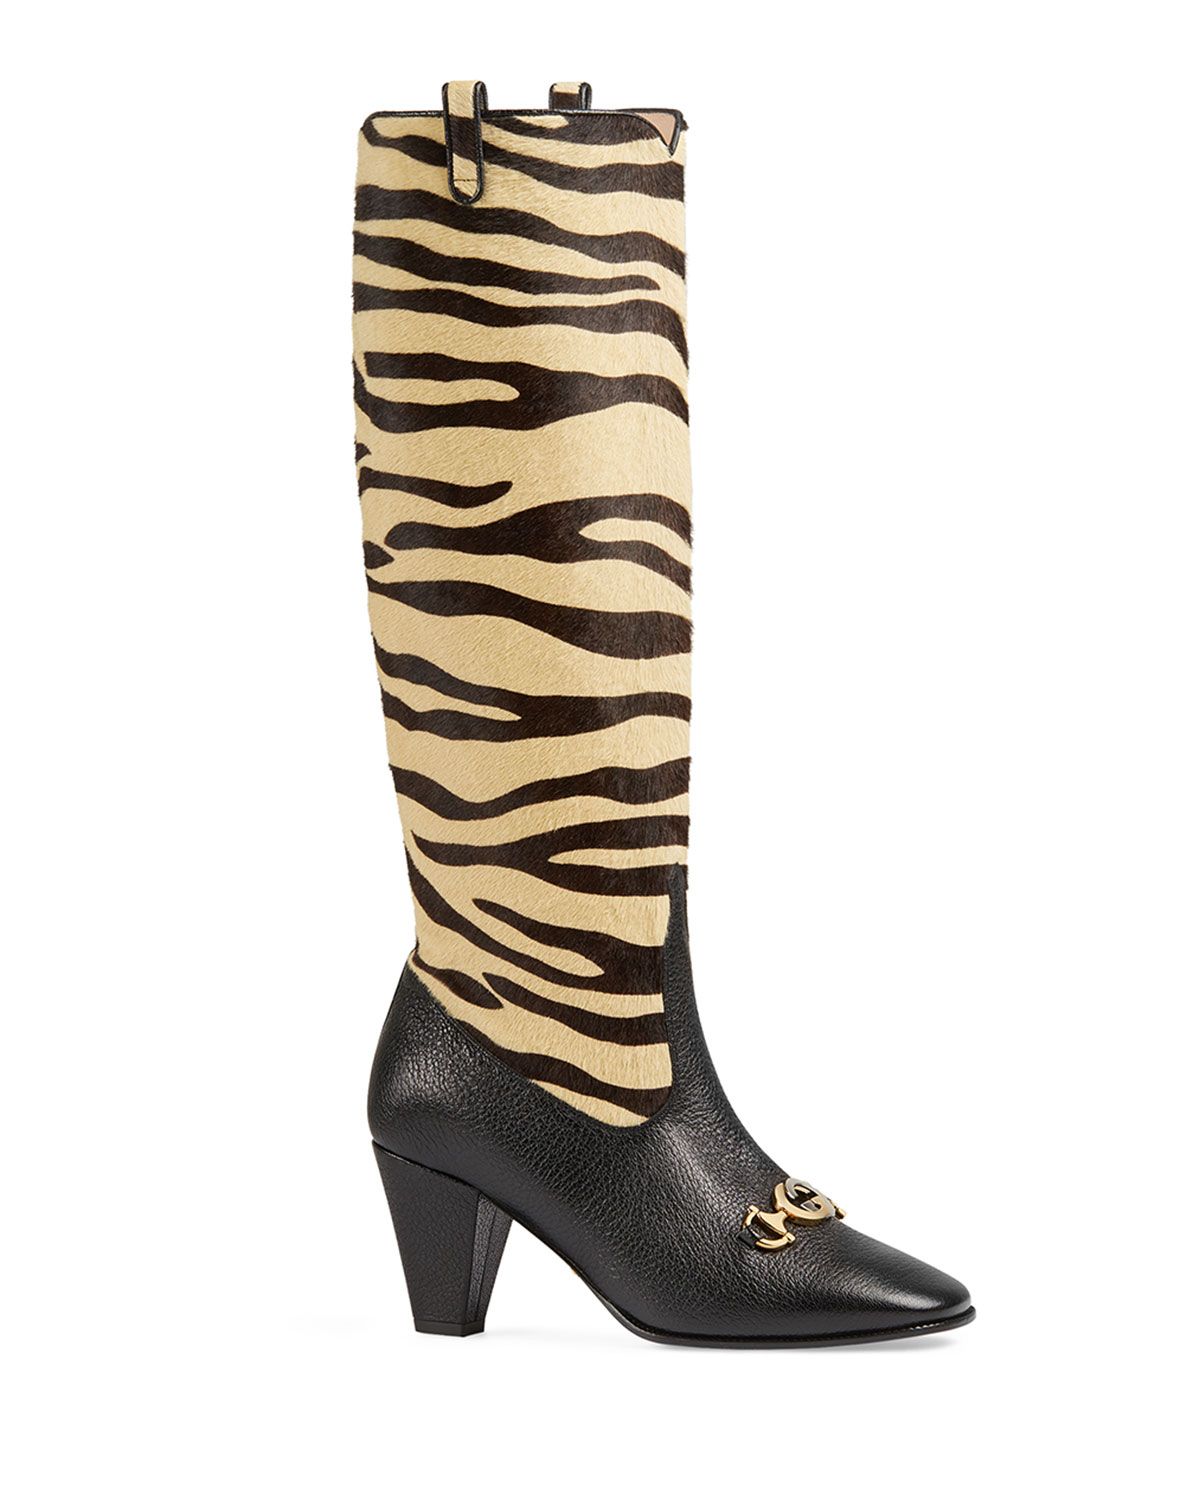 Not Rated Alexis Over The Knee High Heel Boot with Intricate Floral Detail